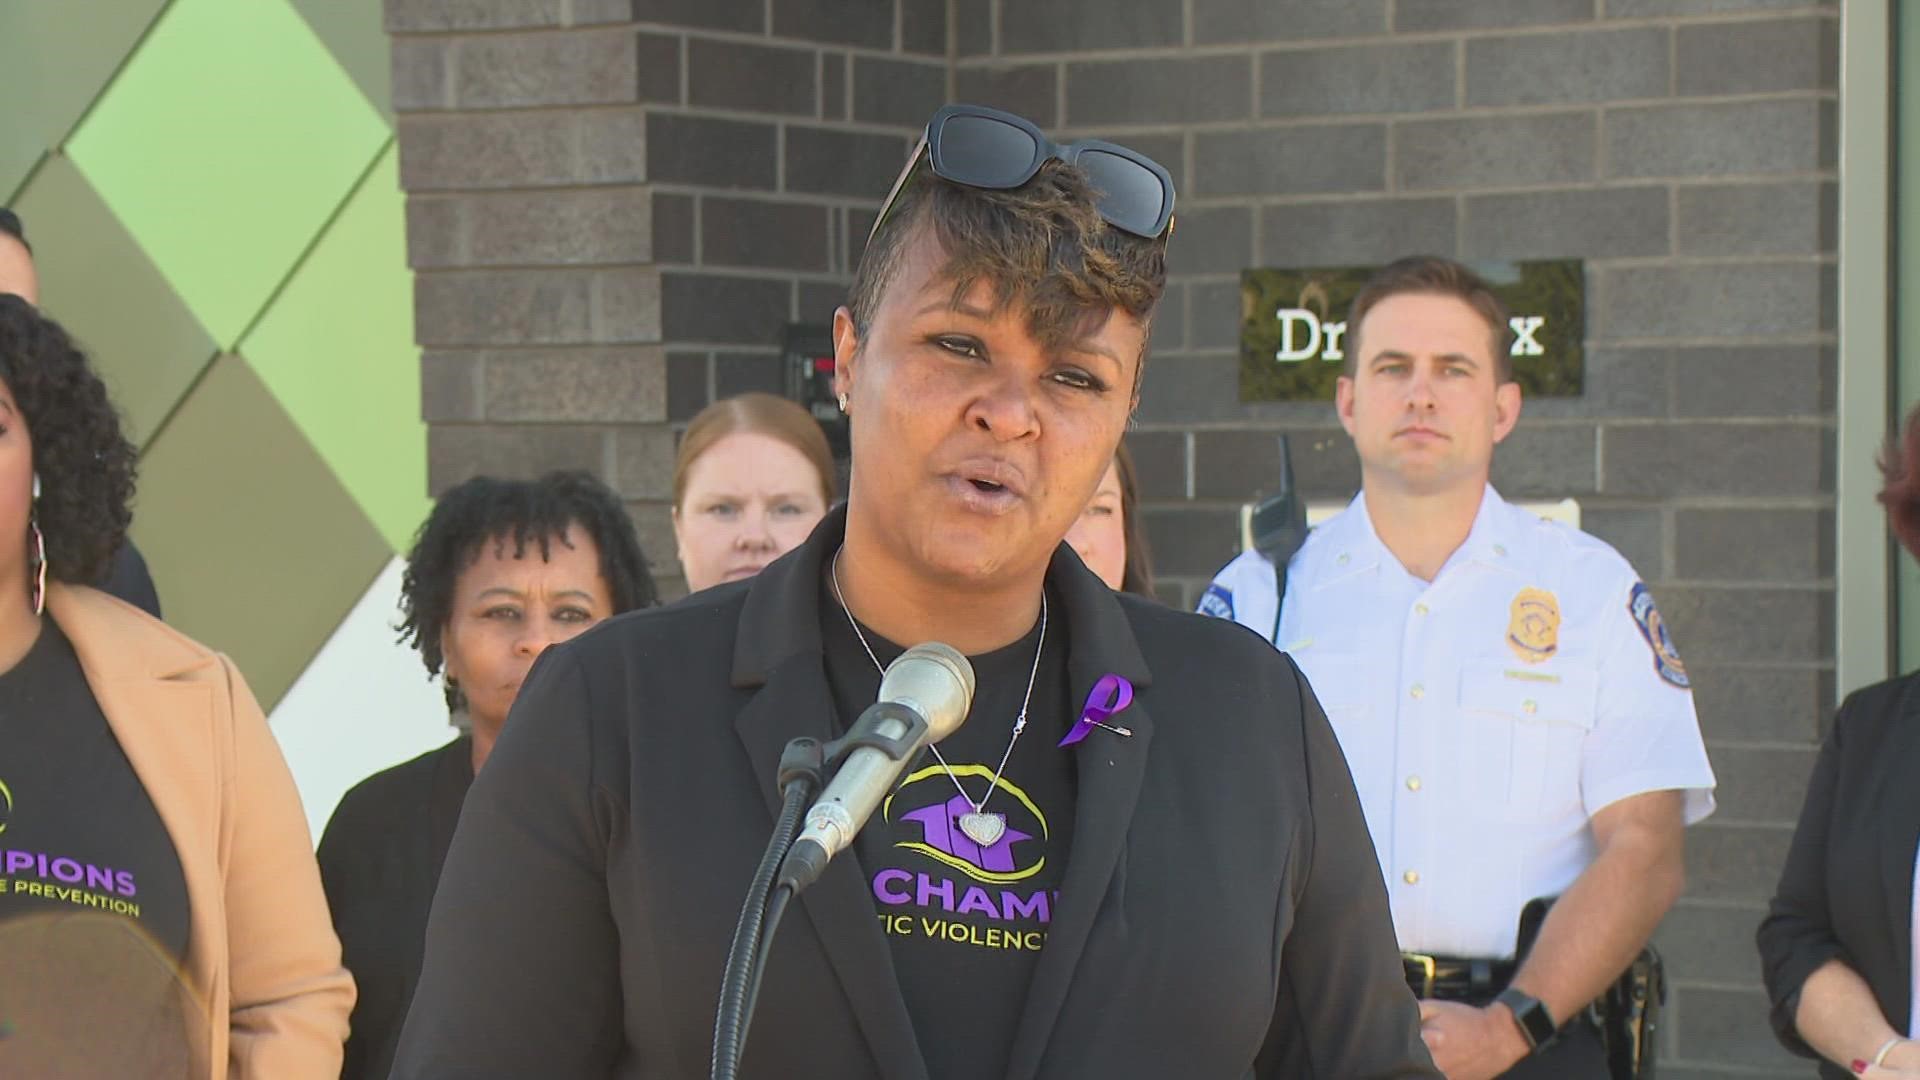 Today, city leaders came together to discuss domestic violence services in Indianapolis.